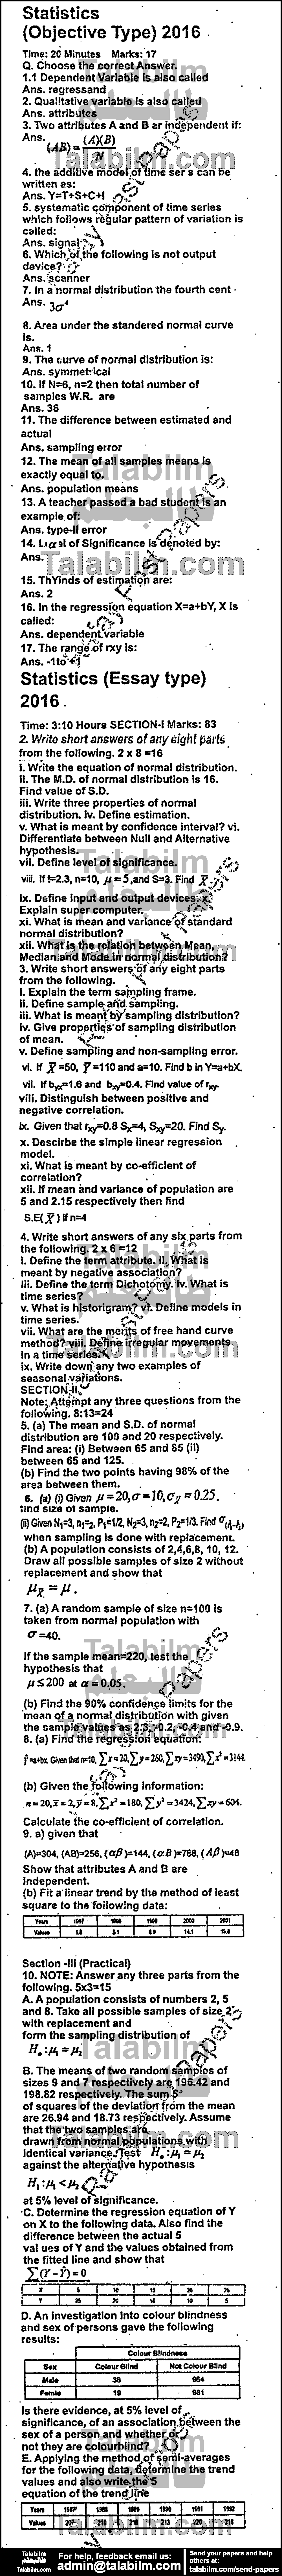 Statistics 0 past paper for Group-I 2016